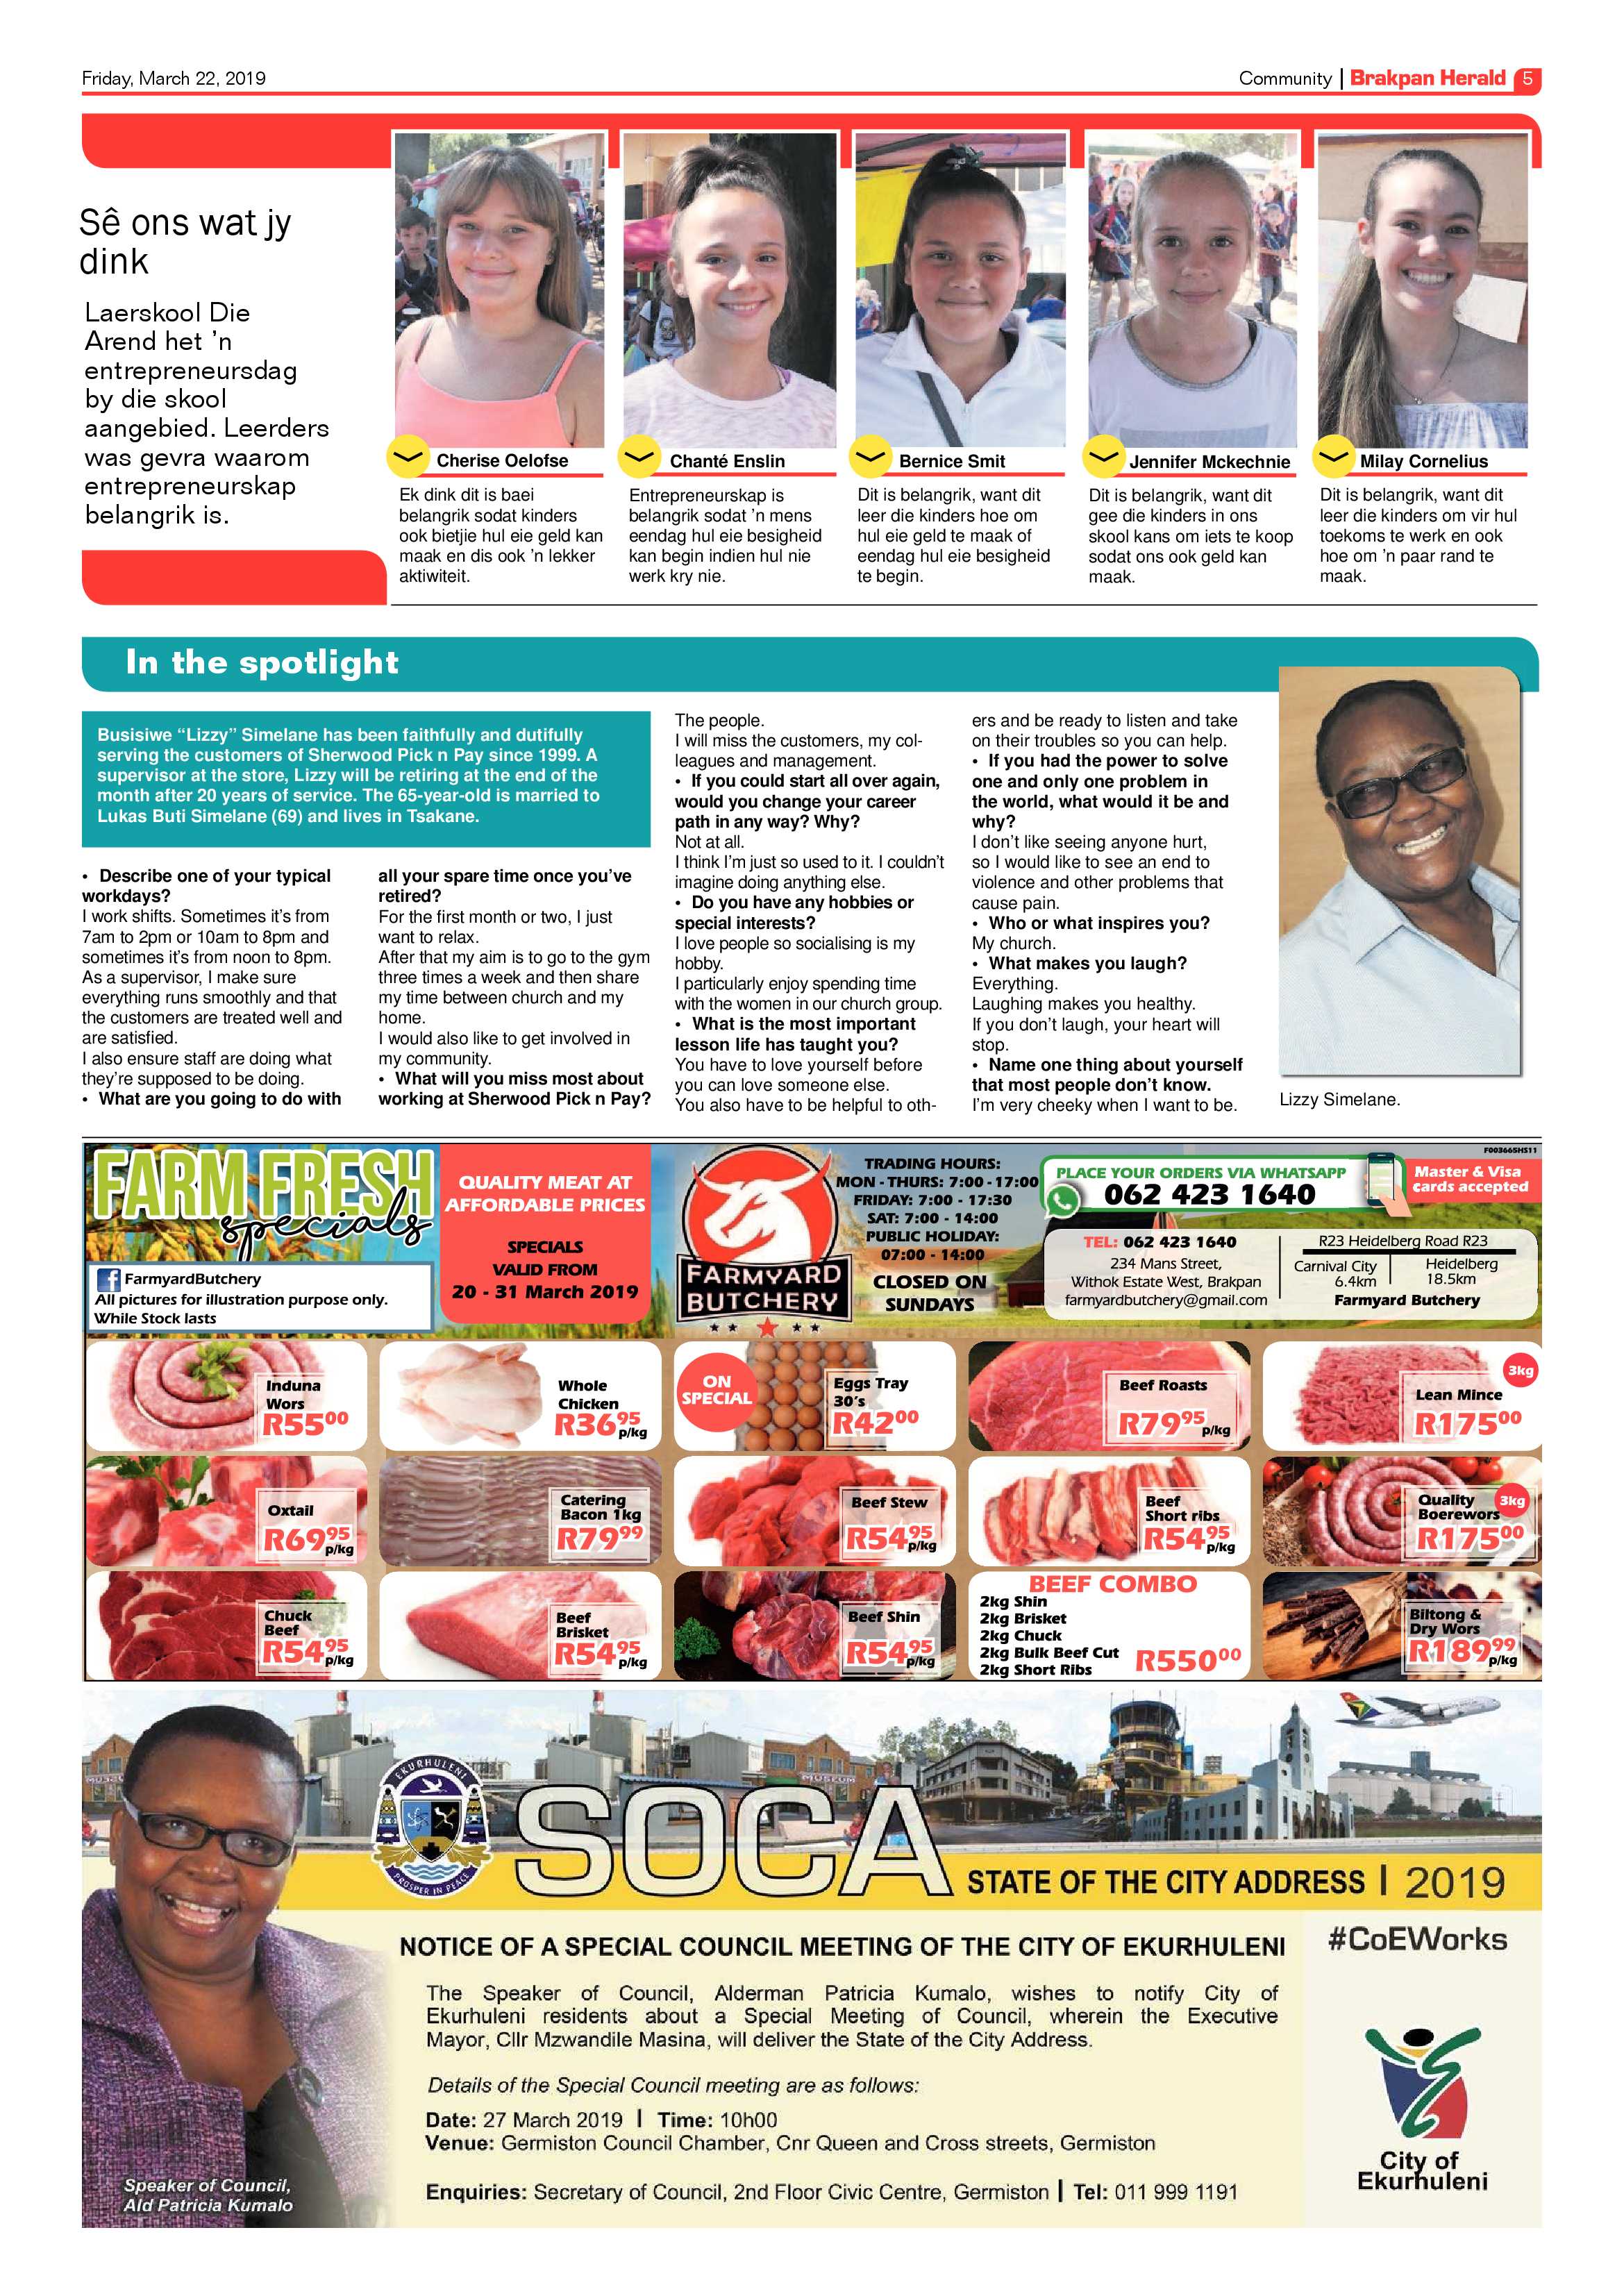 Brakpan Herald 22 March 2019 page 5